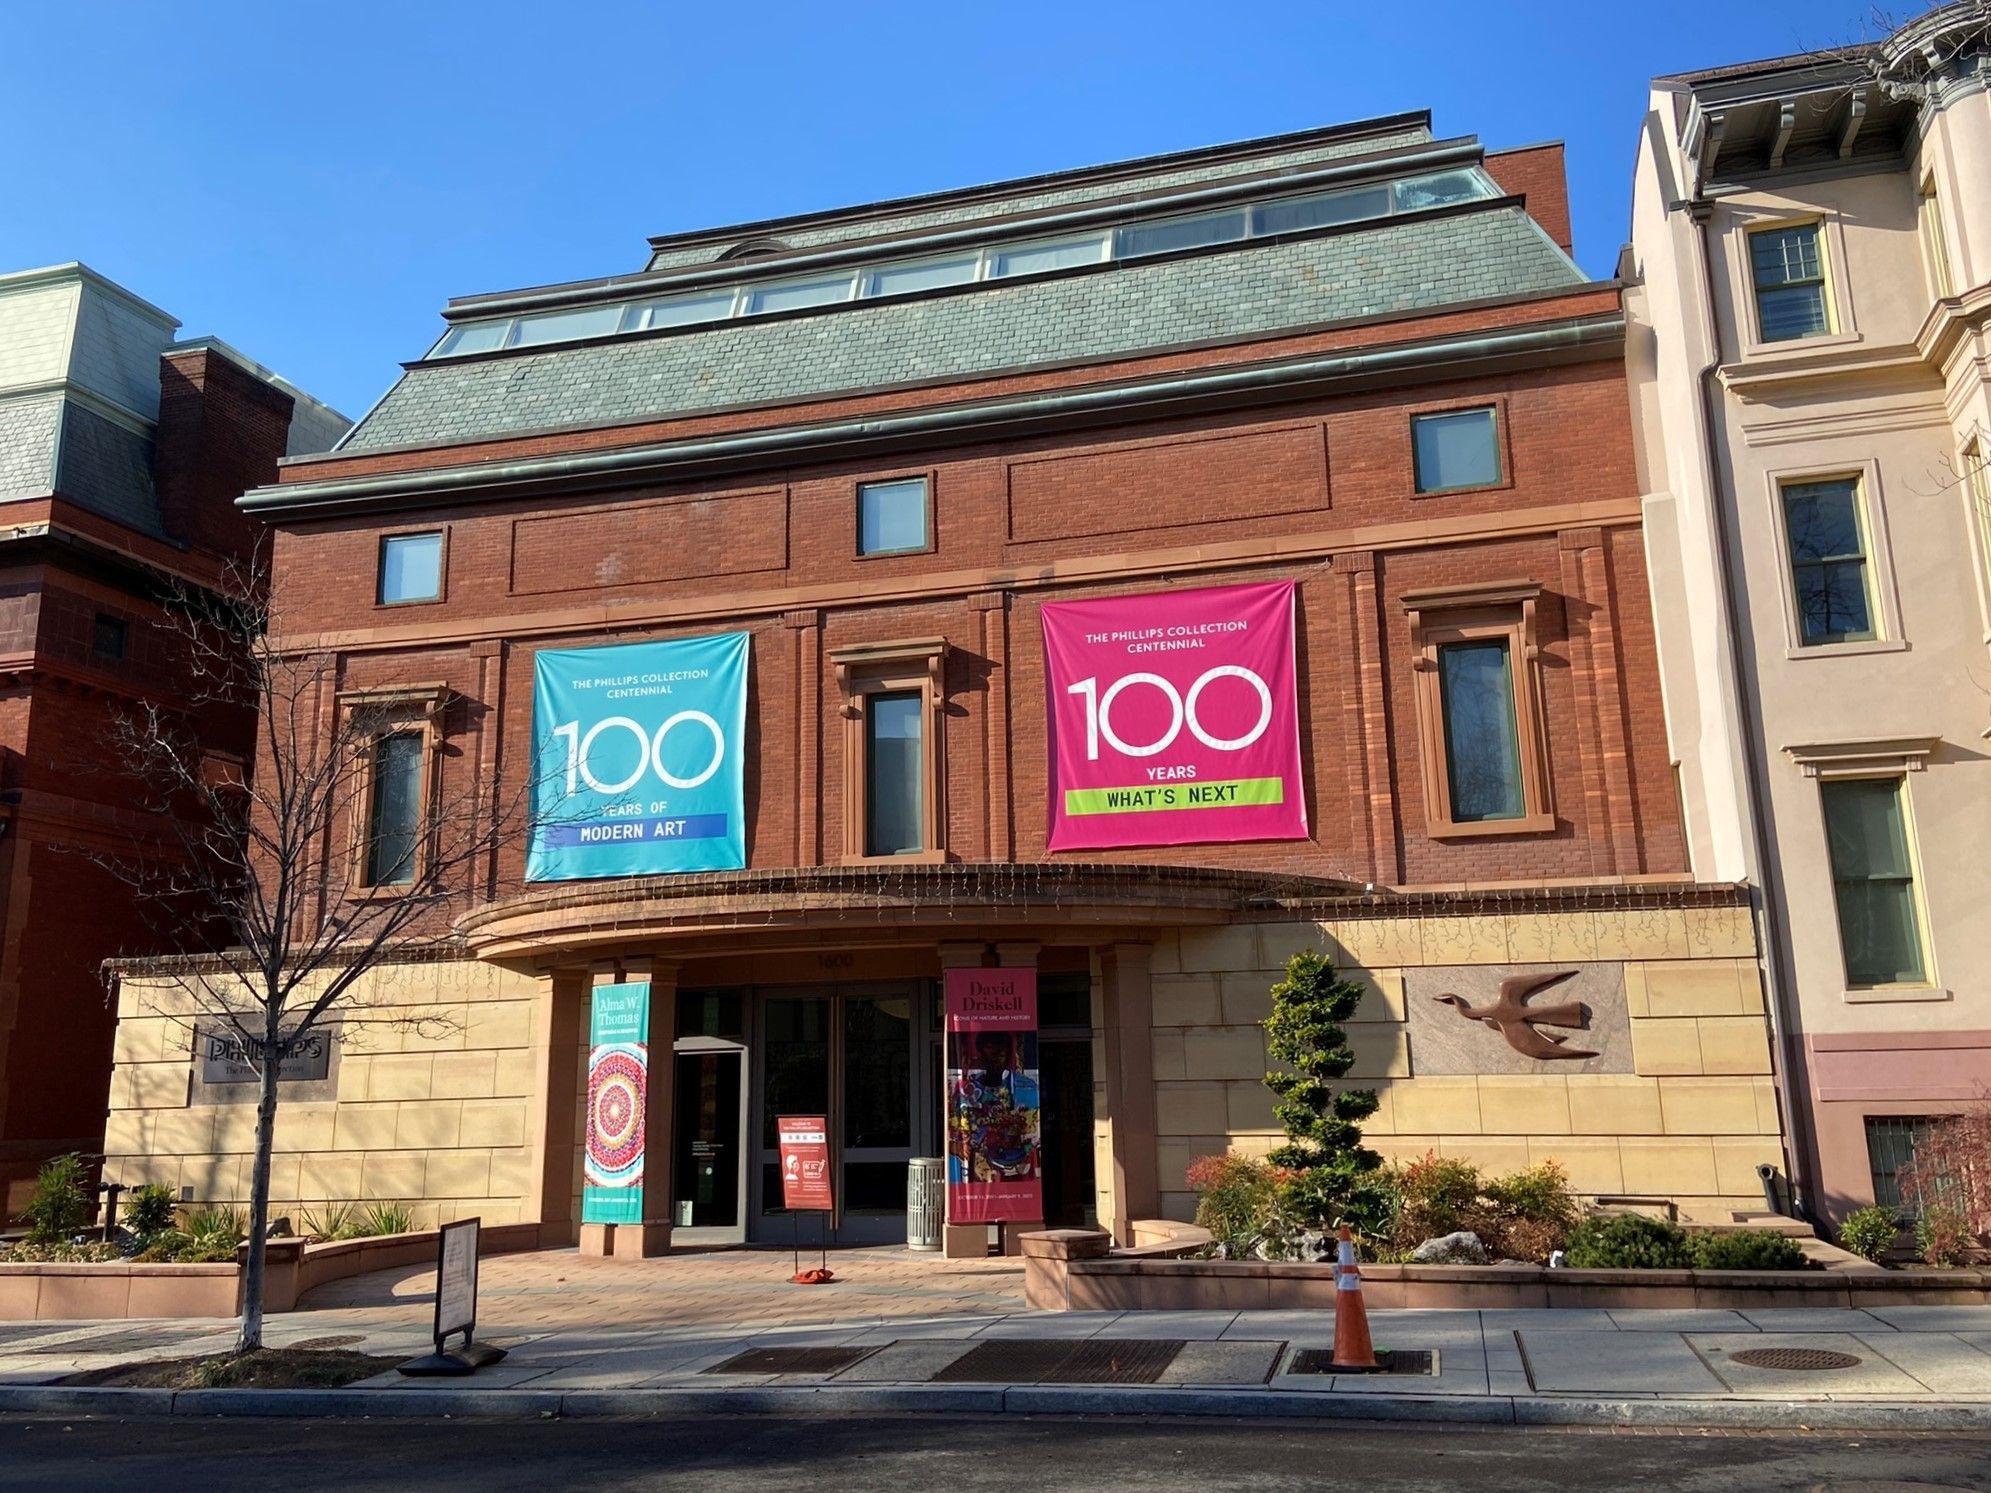 Celebrating 100 Years of The Phillips Collection in D.C.